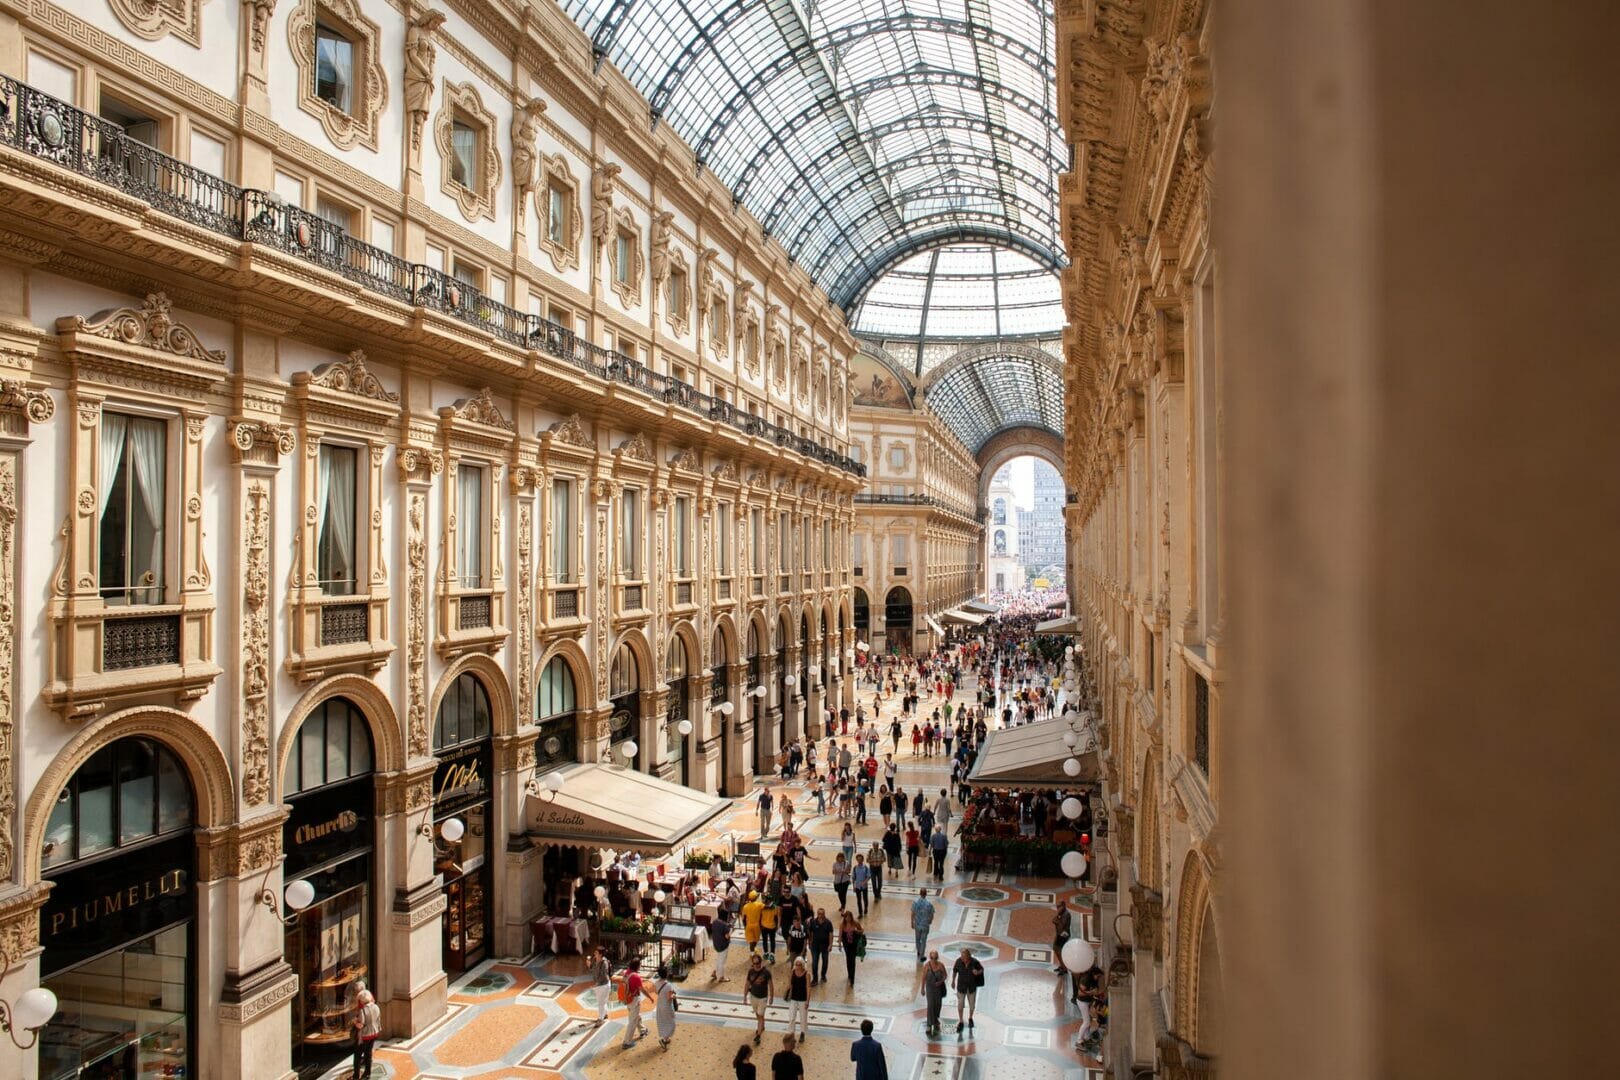 people inside galleria vittorio emanuele ii shopping mall in italy - Top Things to do in Milan Italy